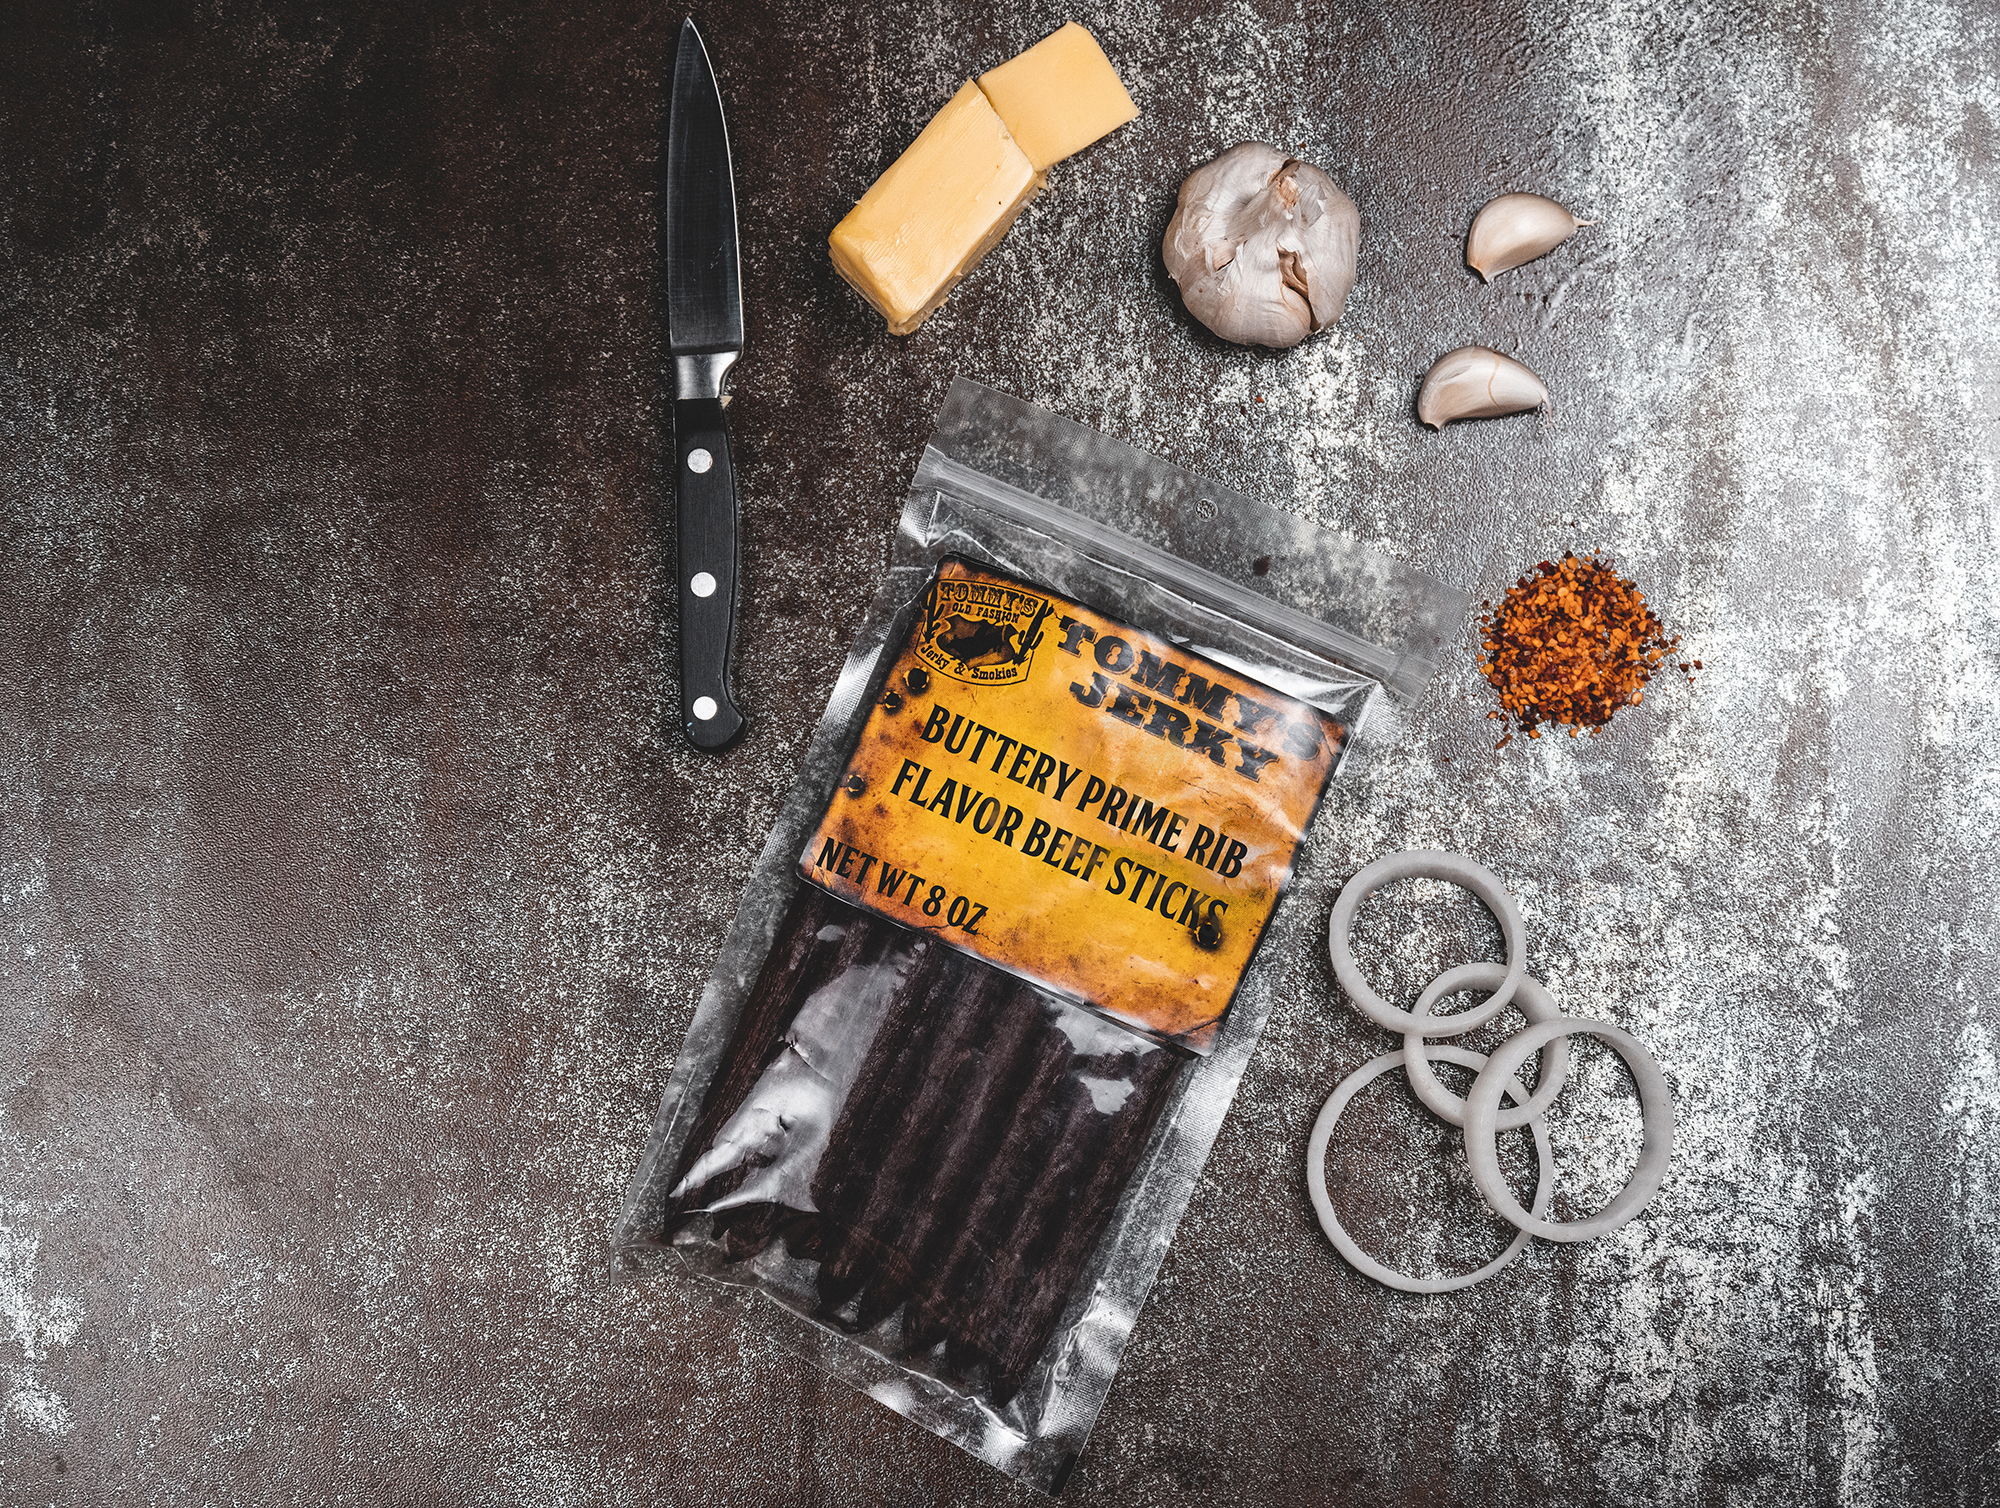 Buttery Prime Rib Flavor Beef Sticks